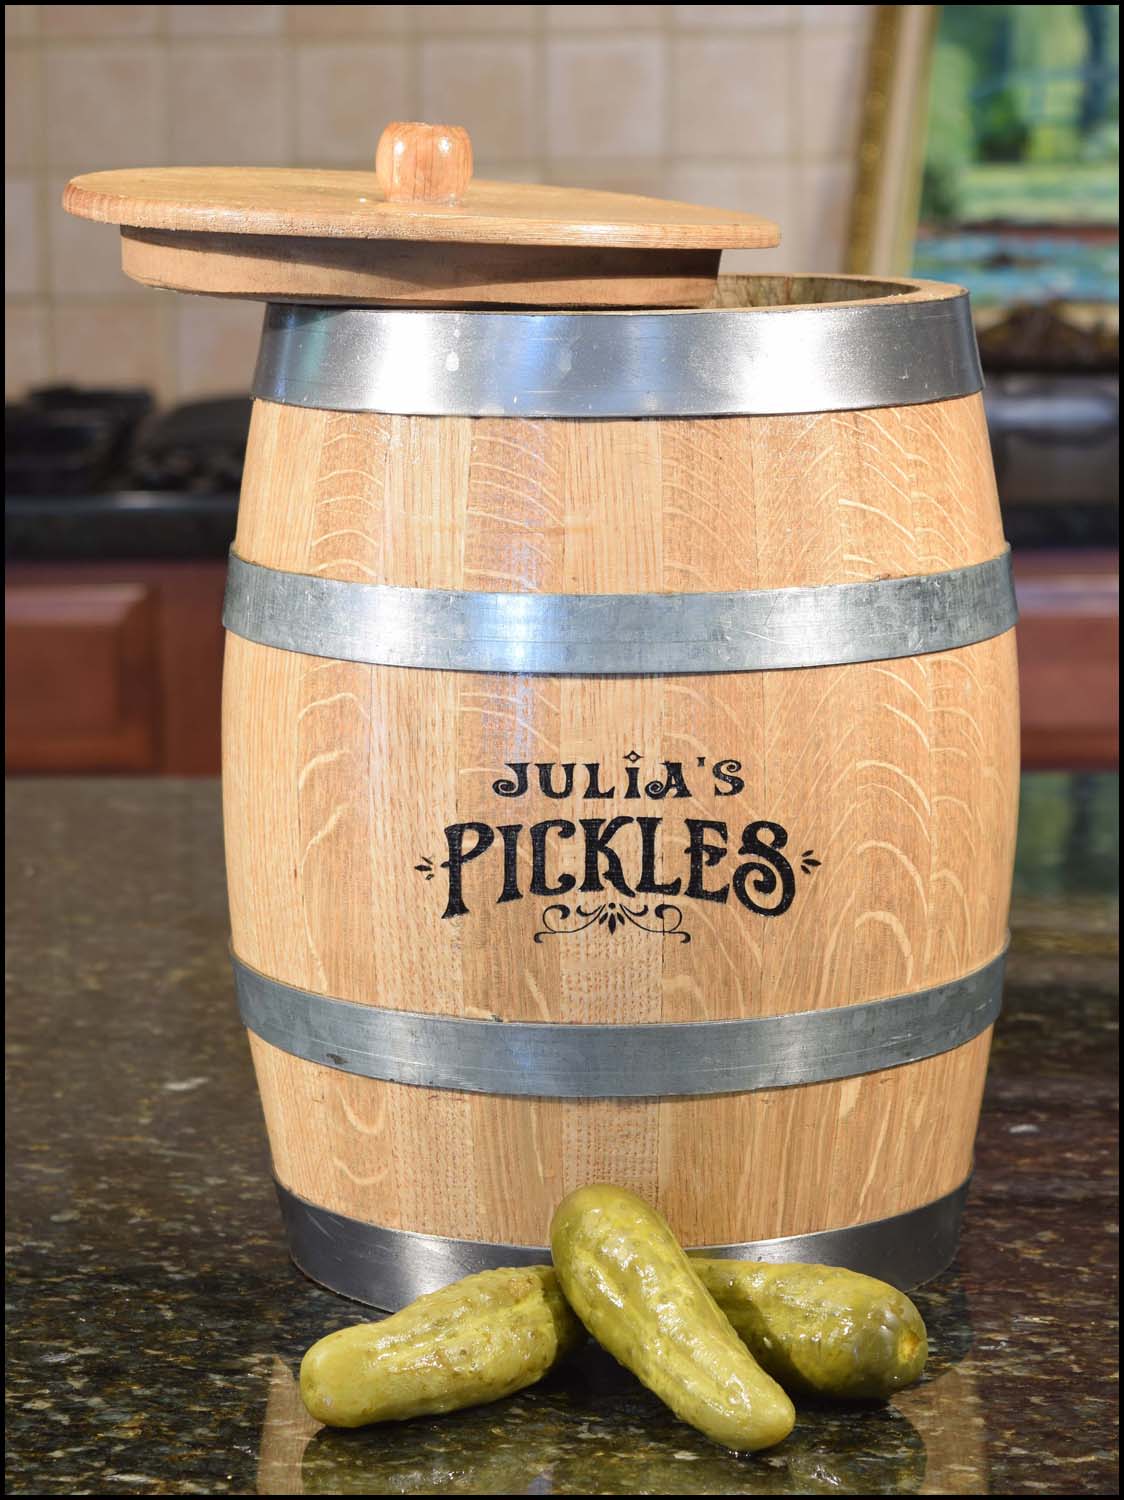 The Amazing Pickle Barrel – Personalized Barrel-Aged Pickling Kit